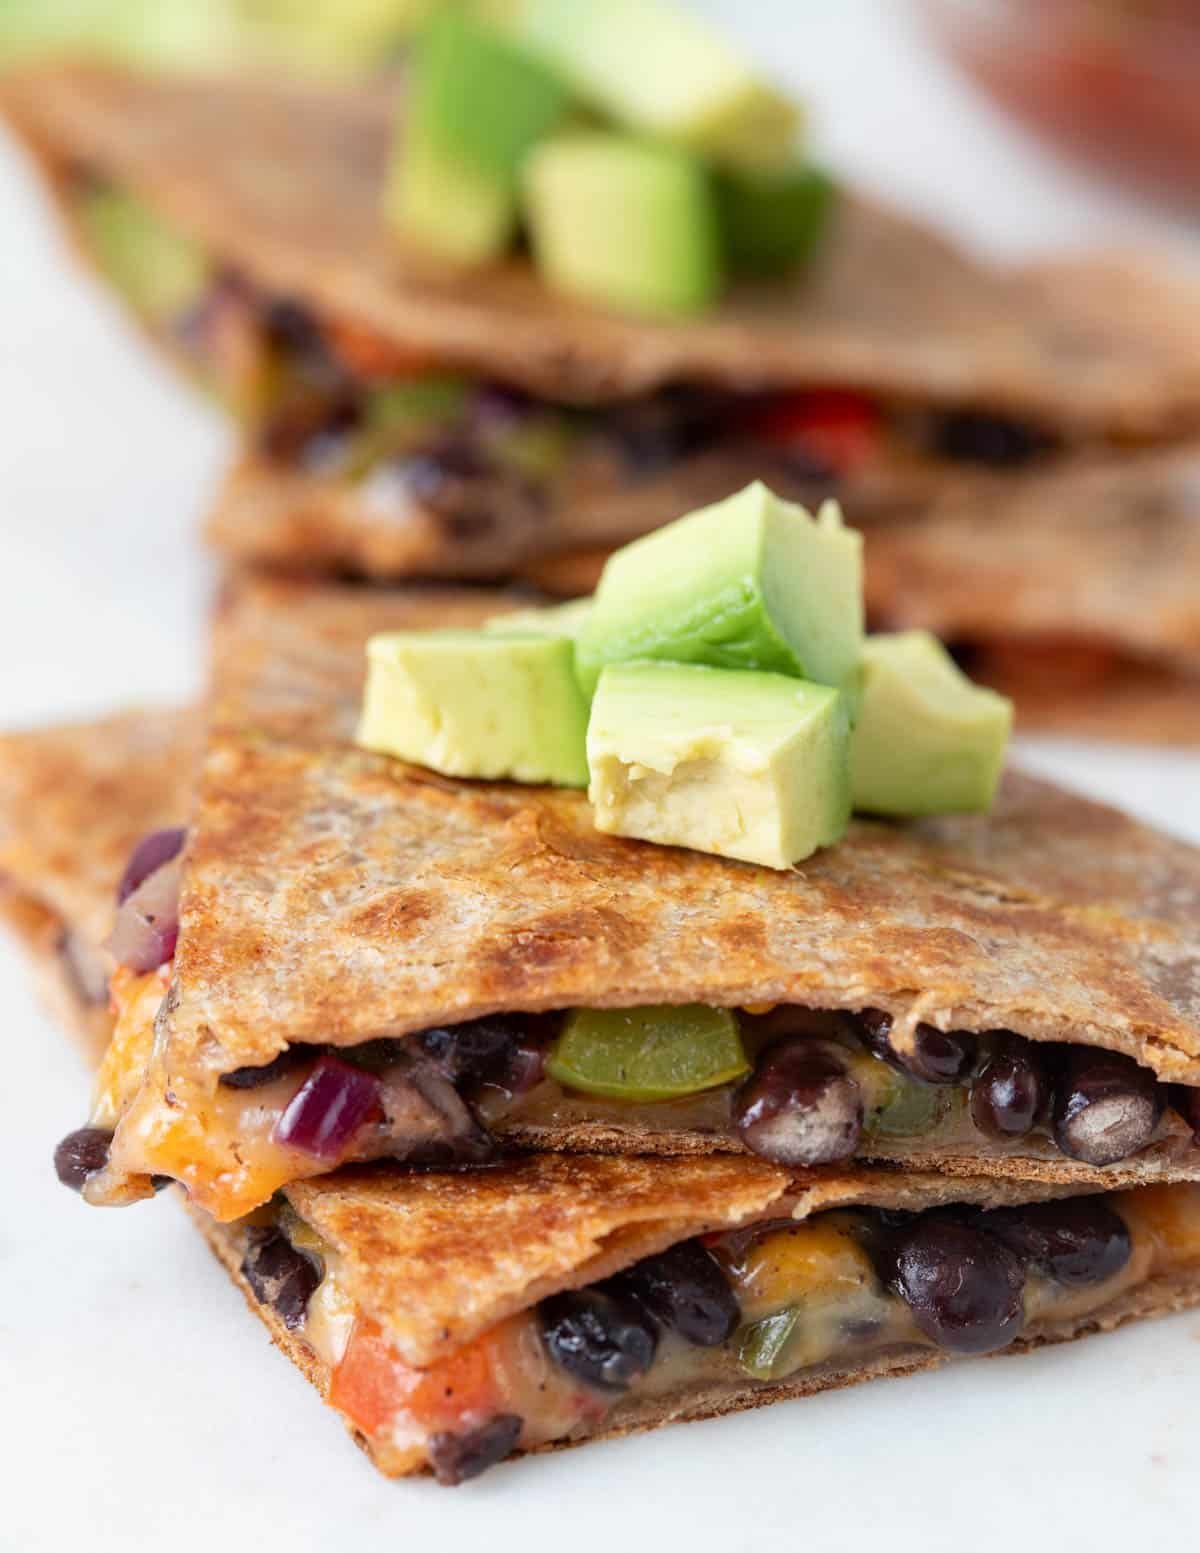 Vegan quesadilla triangles topped with diced avocado.
